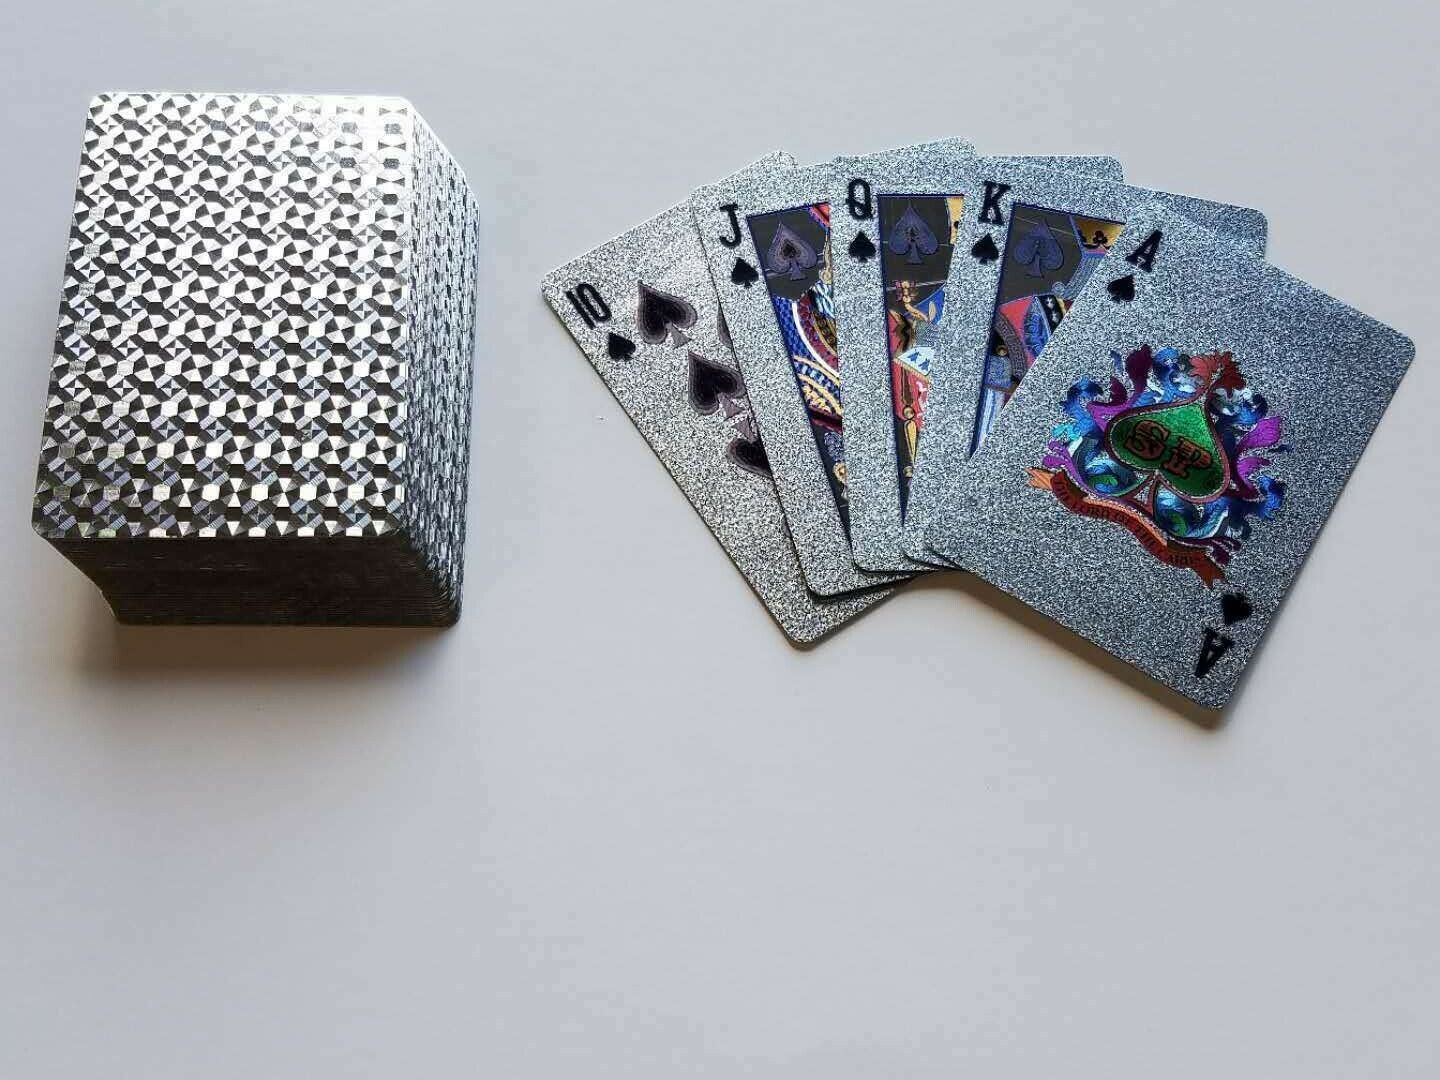 2 Standard Silver Foil Plaid Style Poker Deck Waterproof Plastic Playing Card